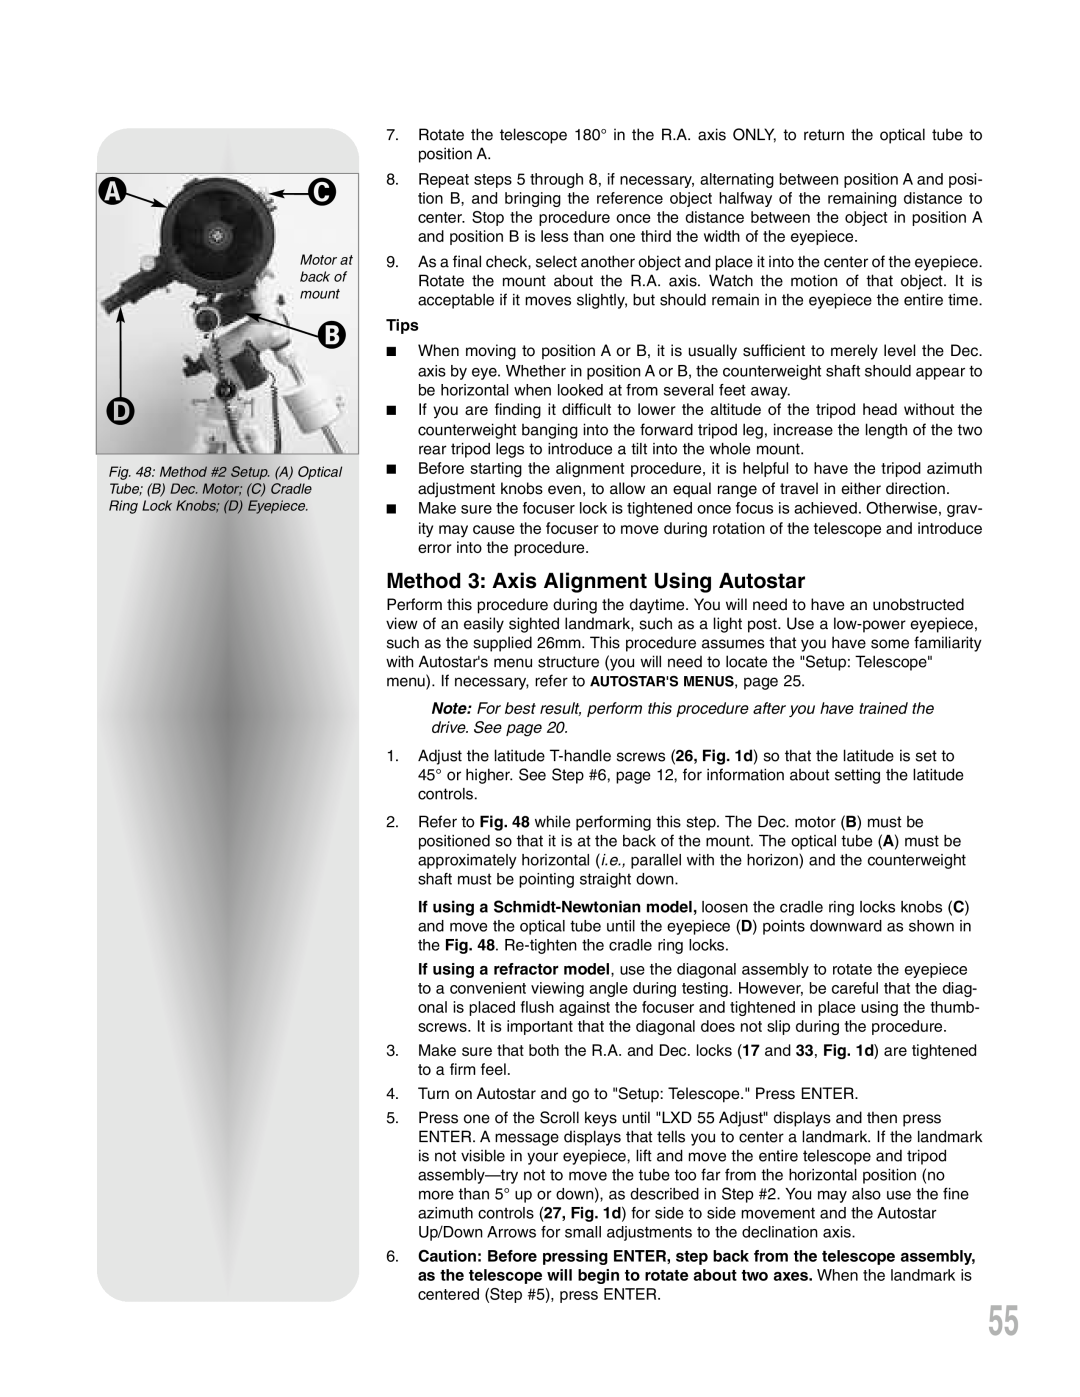 Meade LXD 75-Series instruction manual Method 3: Axis Alignment Using Autostar, Tips 